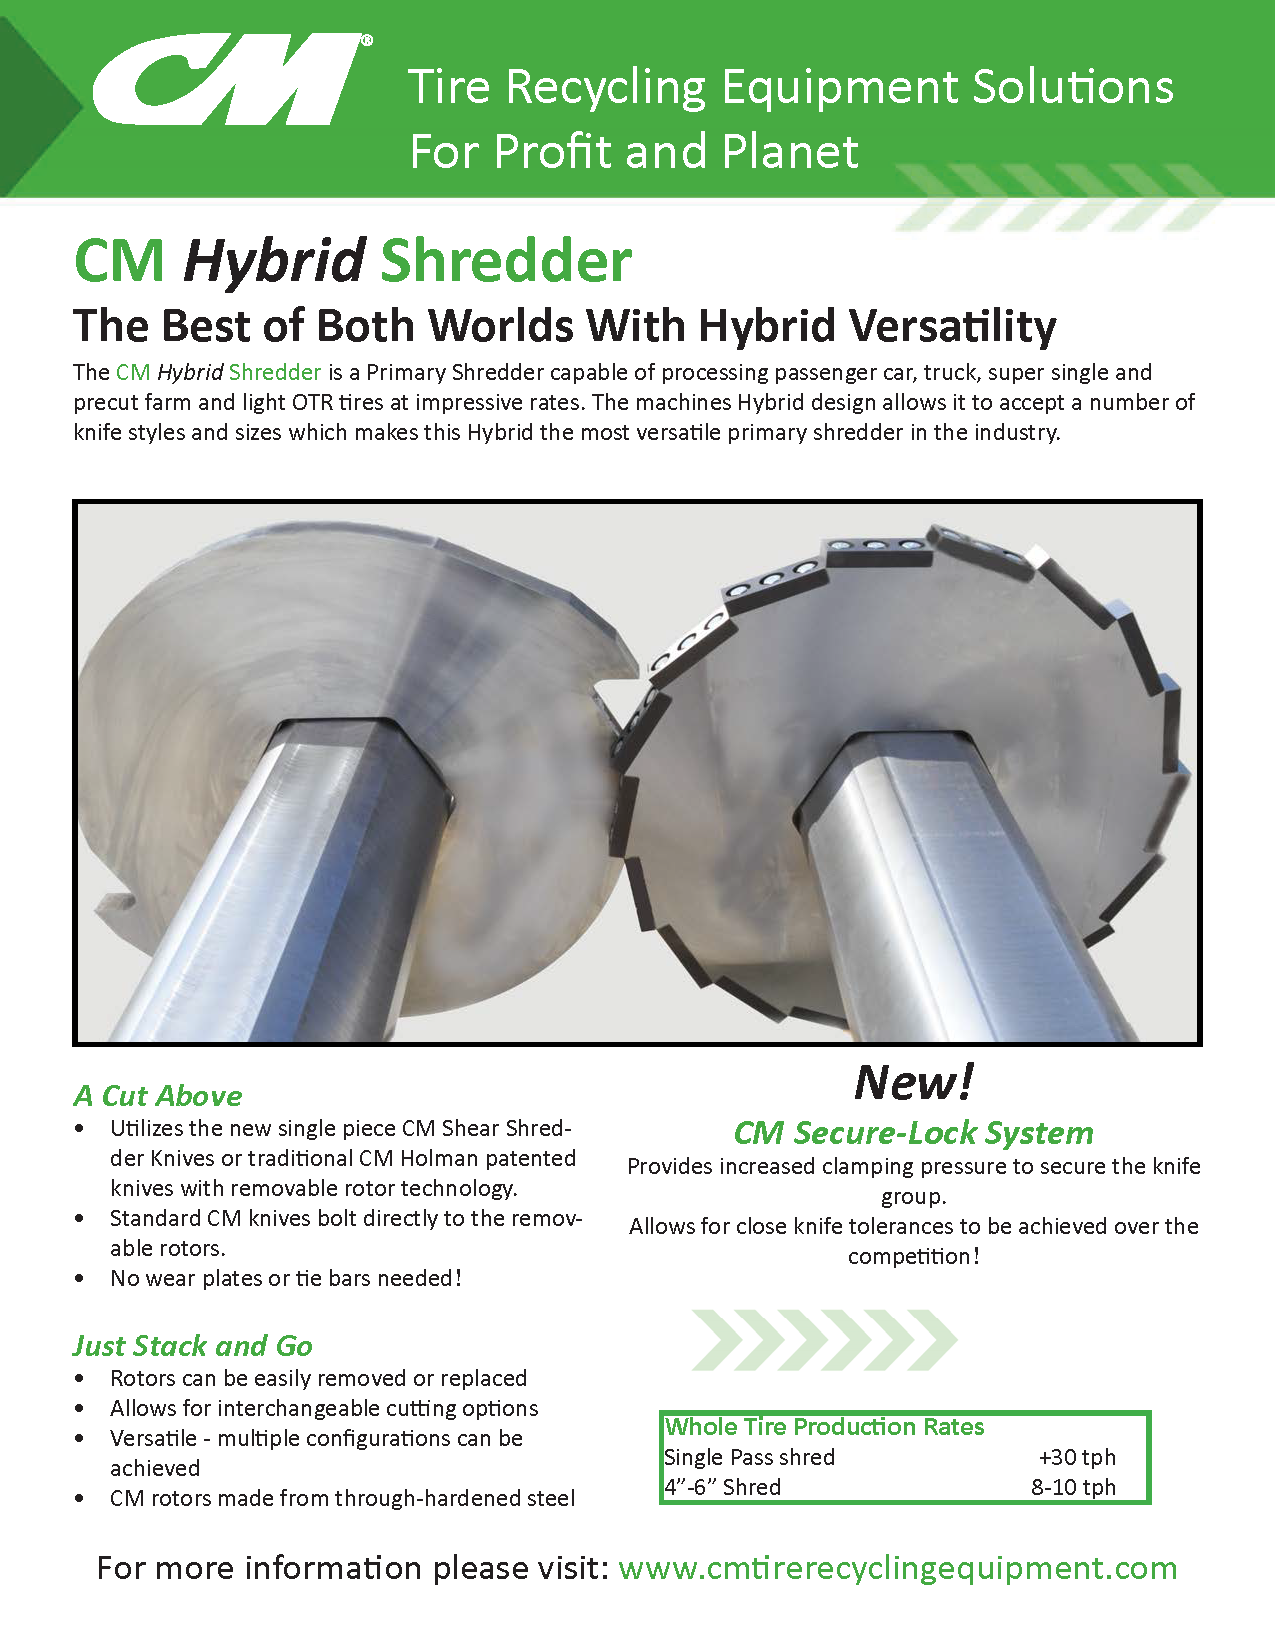 Learn more by viewing the CM Hybrid Shredder Brochure.